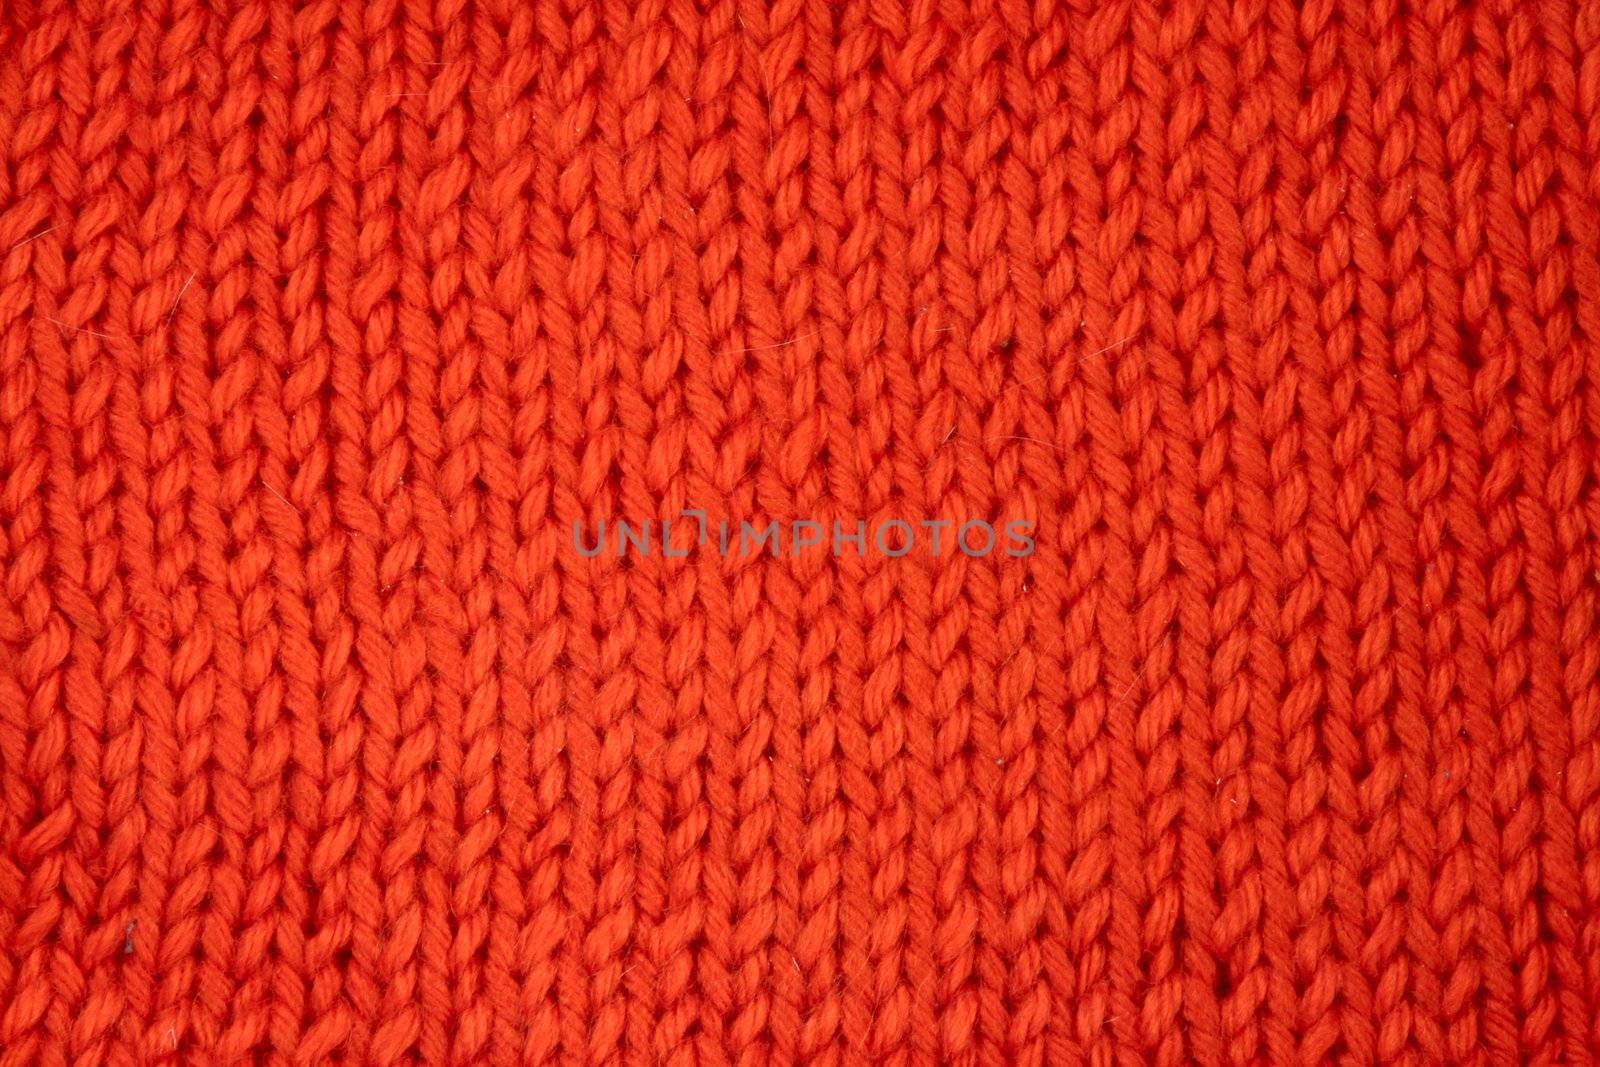 Wool knitted textured background close up